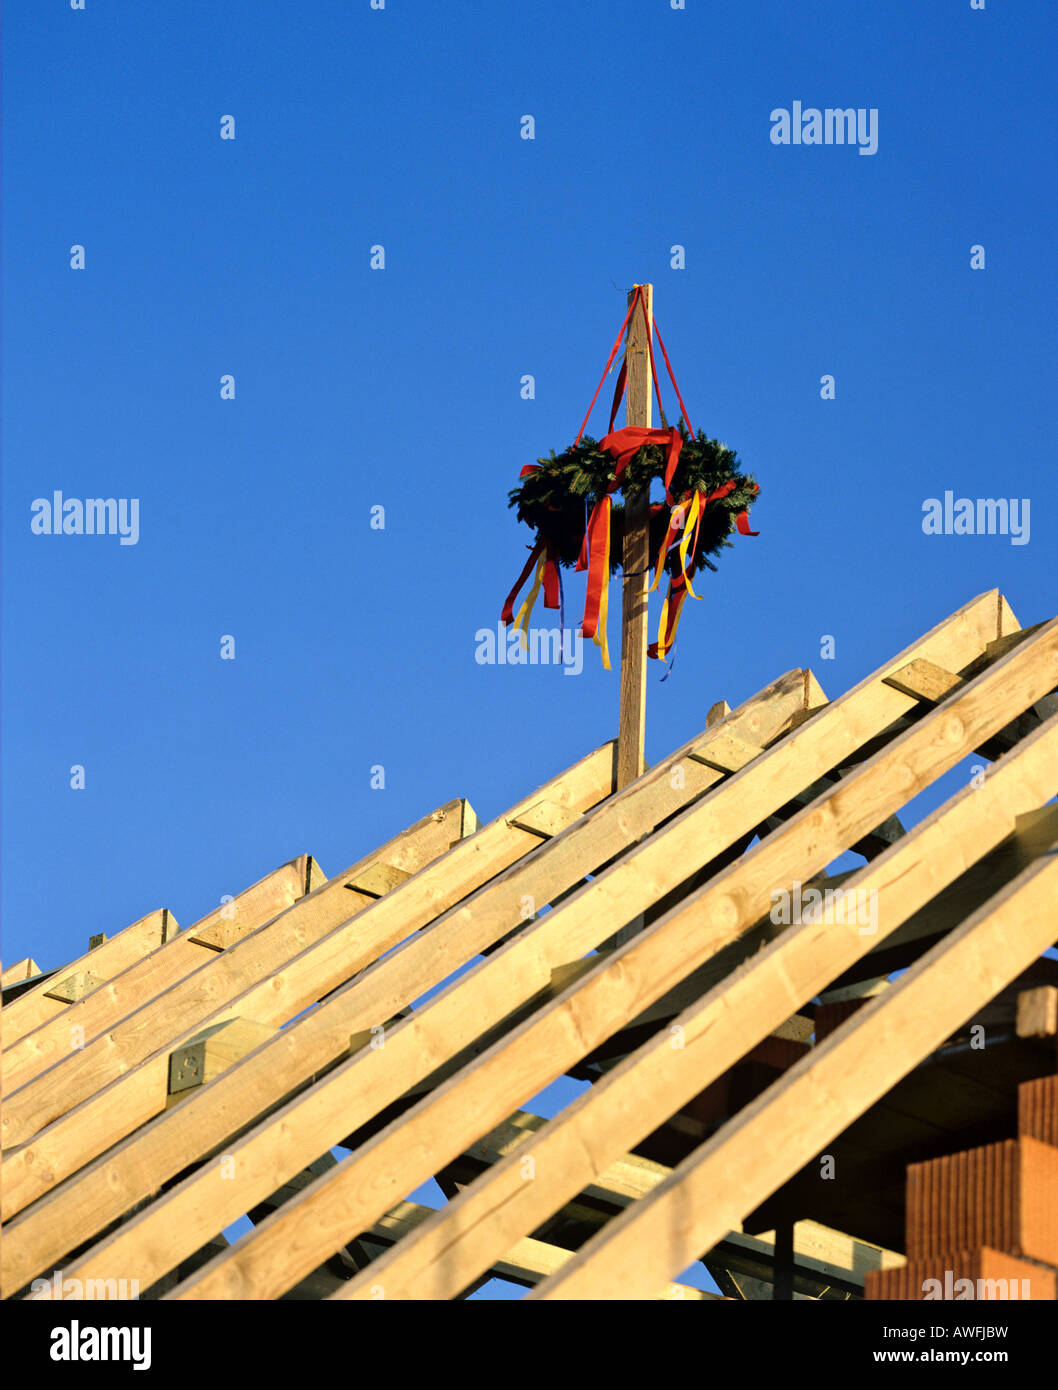 Topping out ceremony, rooftop rafters Stock Photo